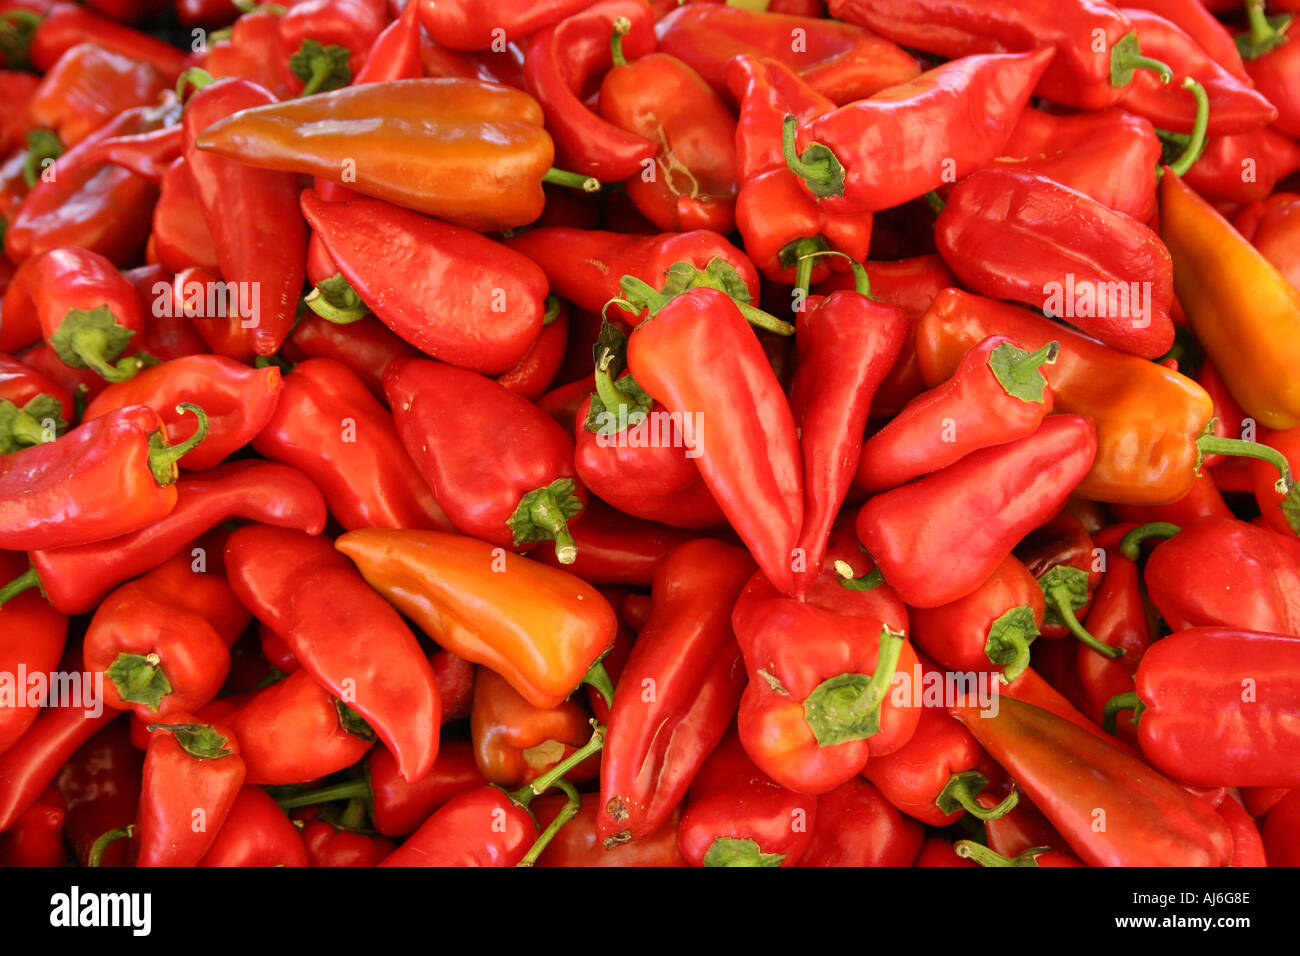 Close up of red peppers on a market stall  Stock Photo